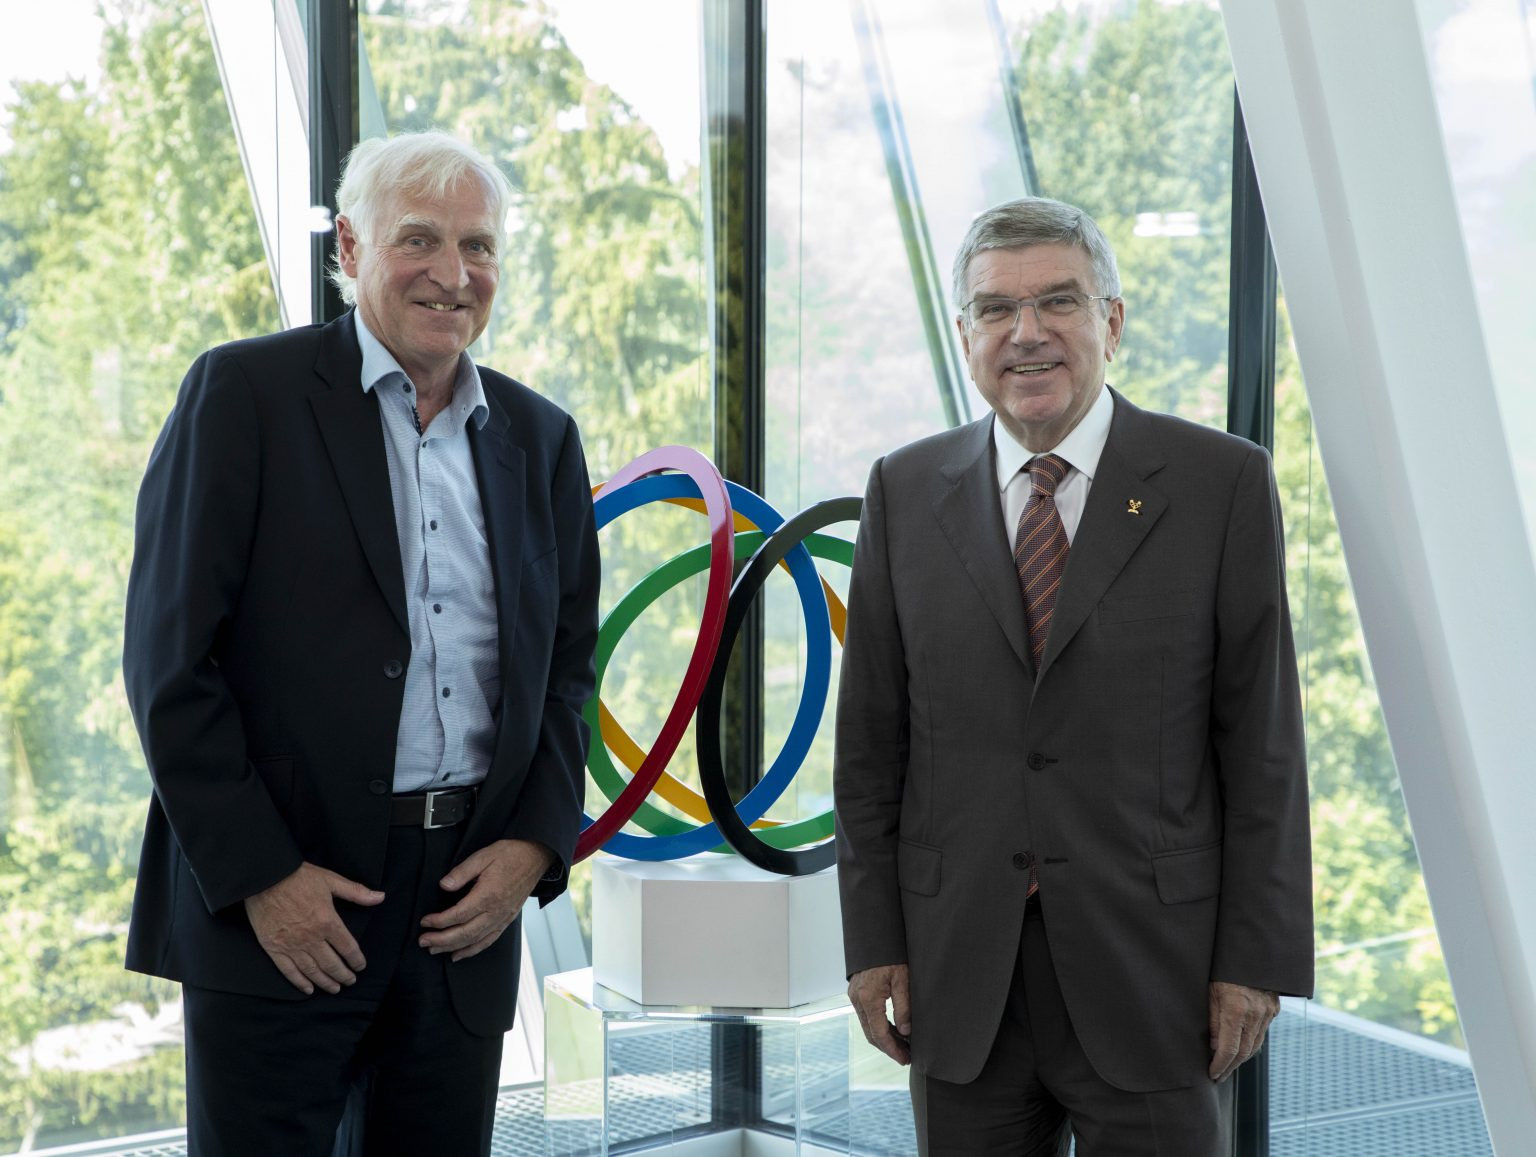 Niels Nygaard met with IOC President Thomas Bach in Lausanne earlier this month ©IOC